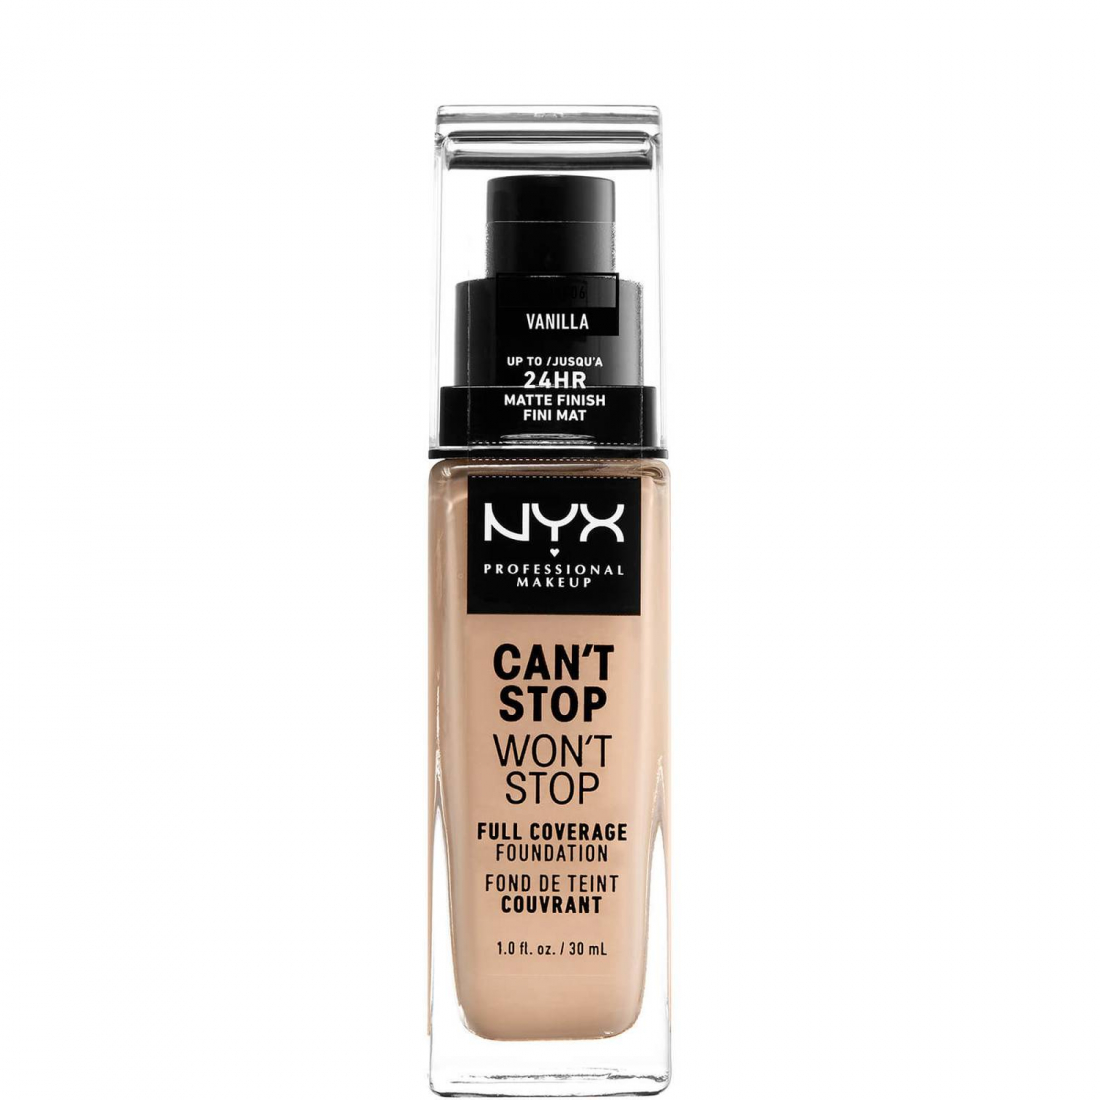 'Can't Stop Won't Stop Full Coverage' Foundation - Vanilla 30 ml